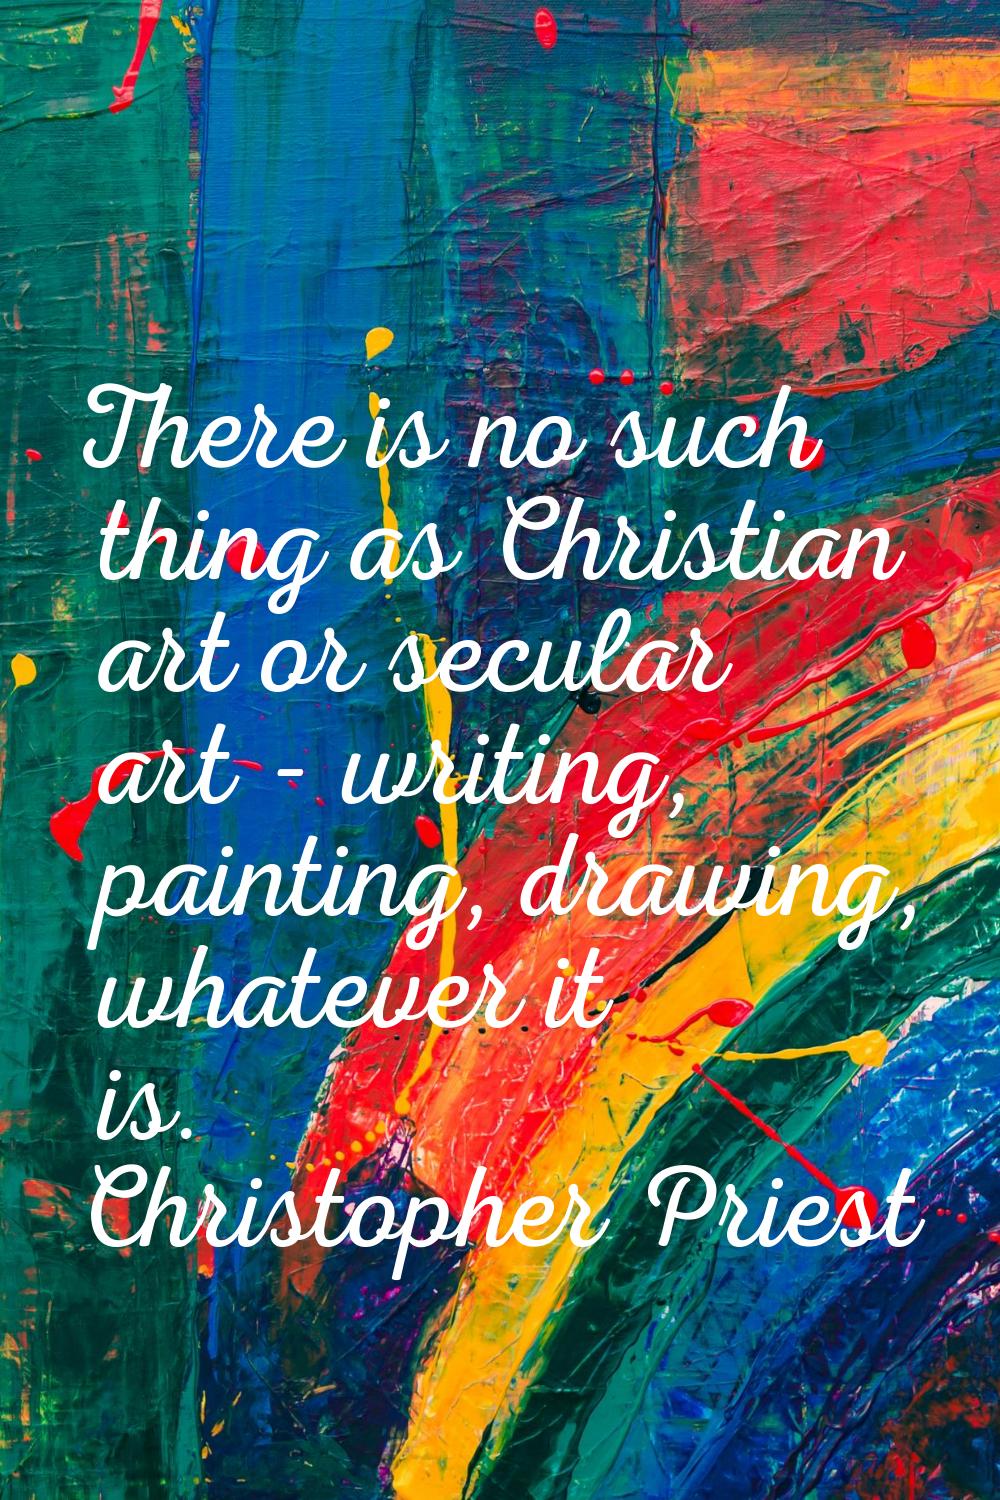 There is no such thing as Christian art or secular art - writing, painting, drawing, whatever it is